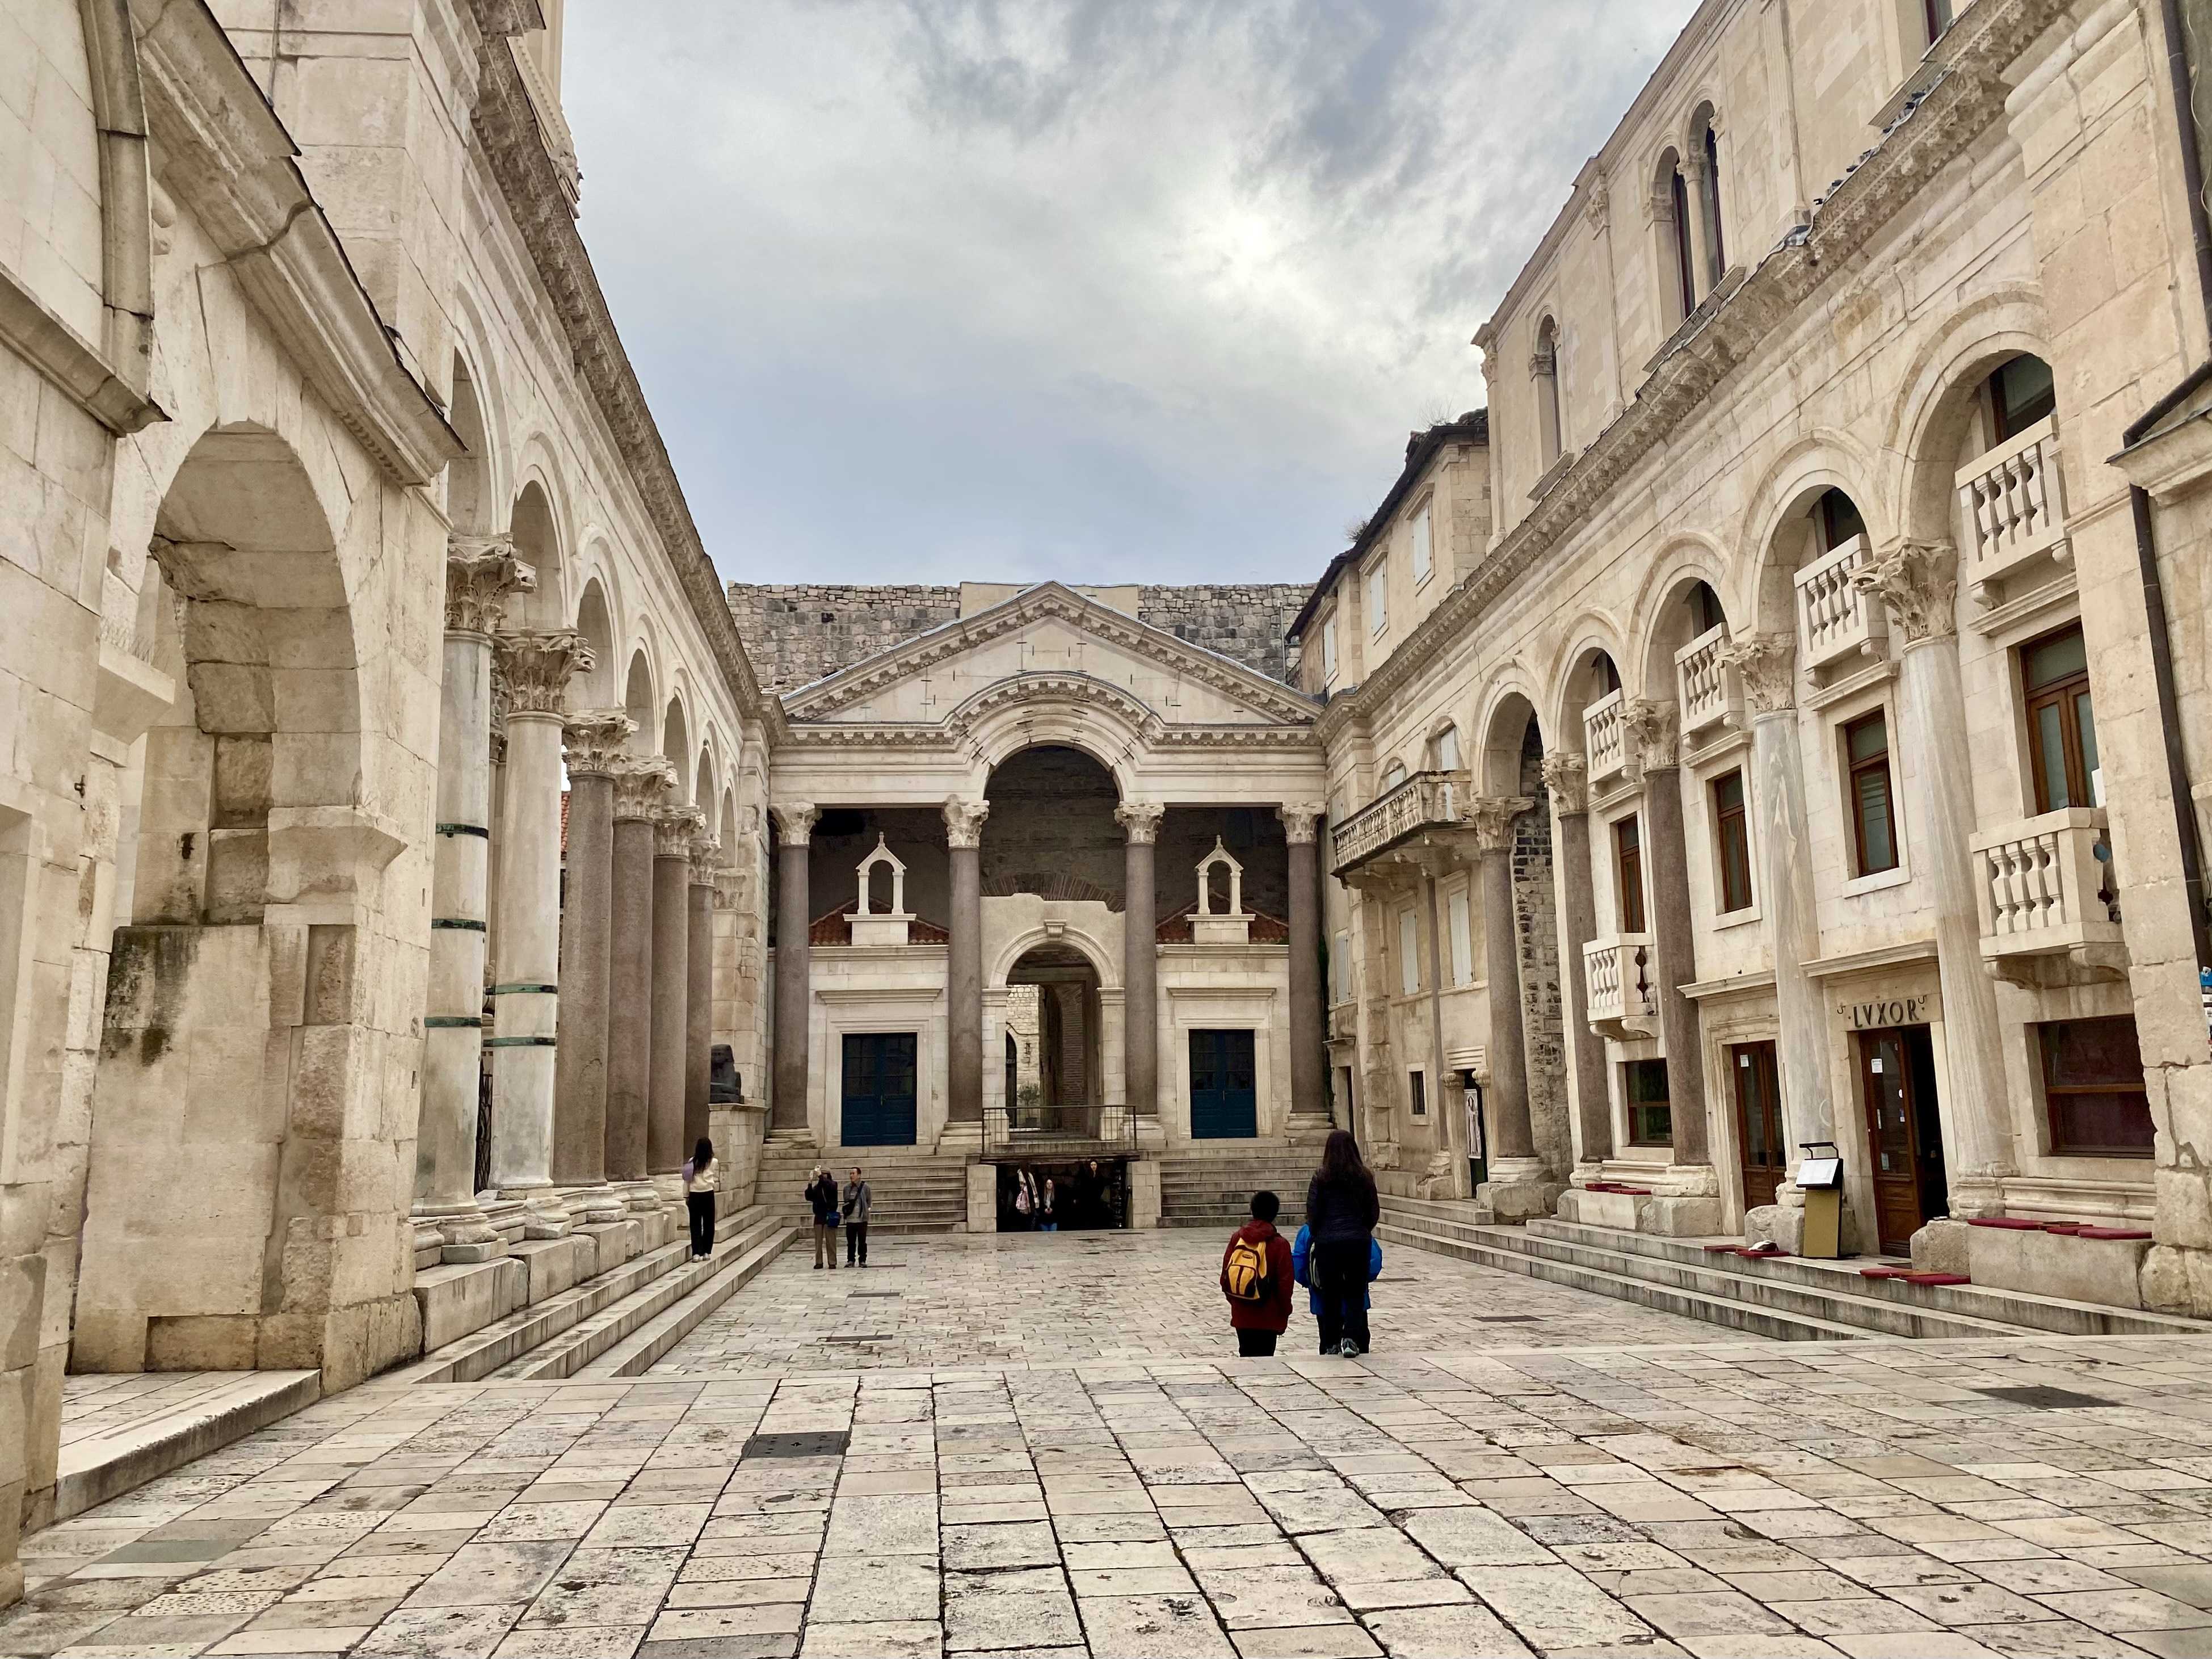 Peristyle of Diocletian Palace, Split